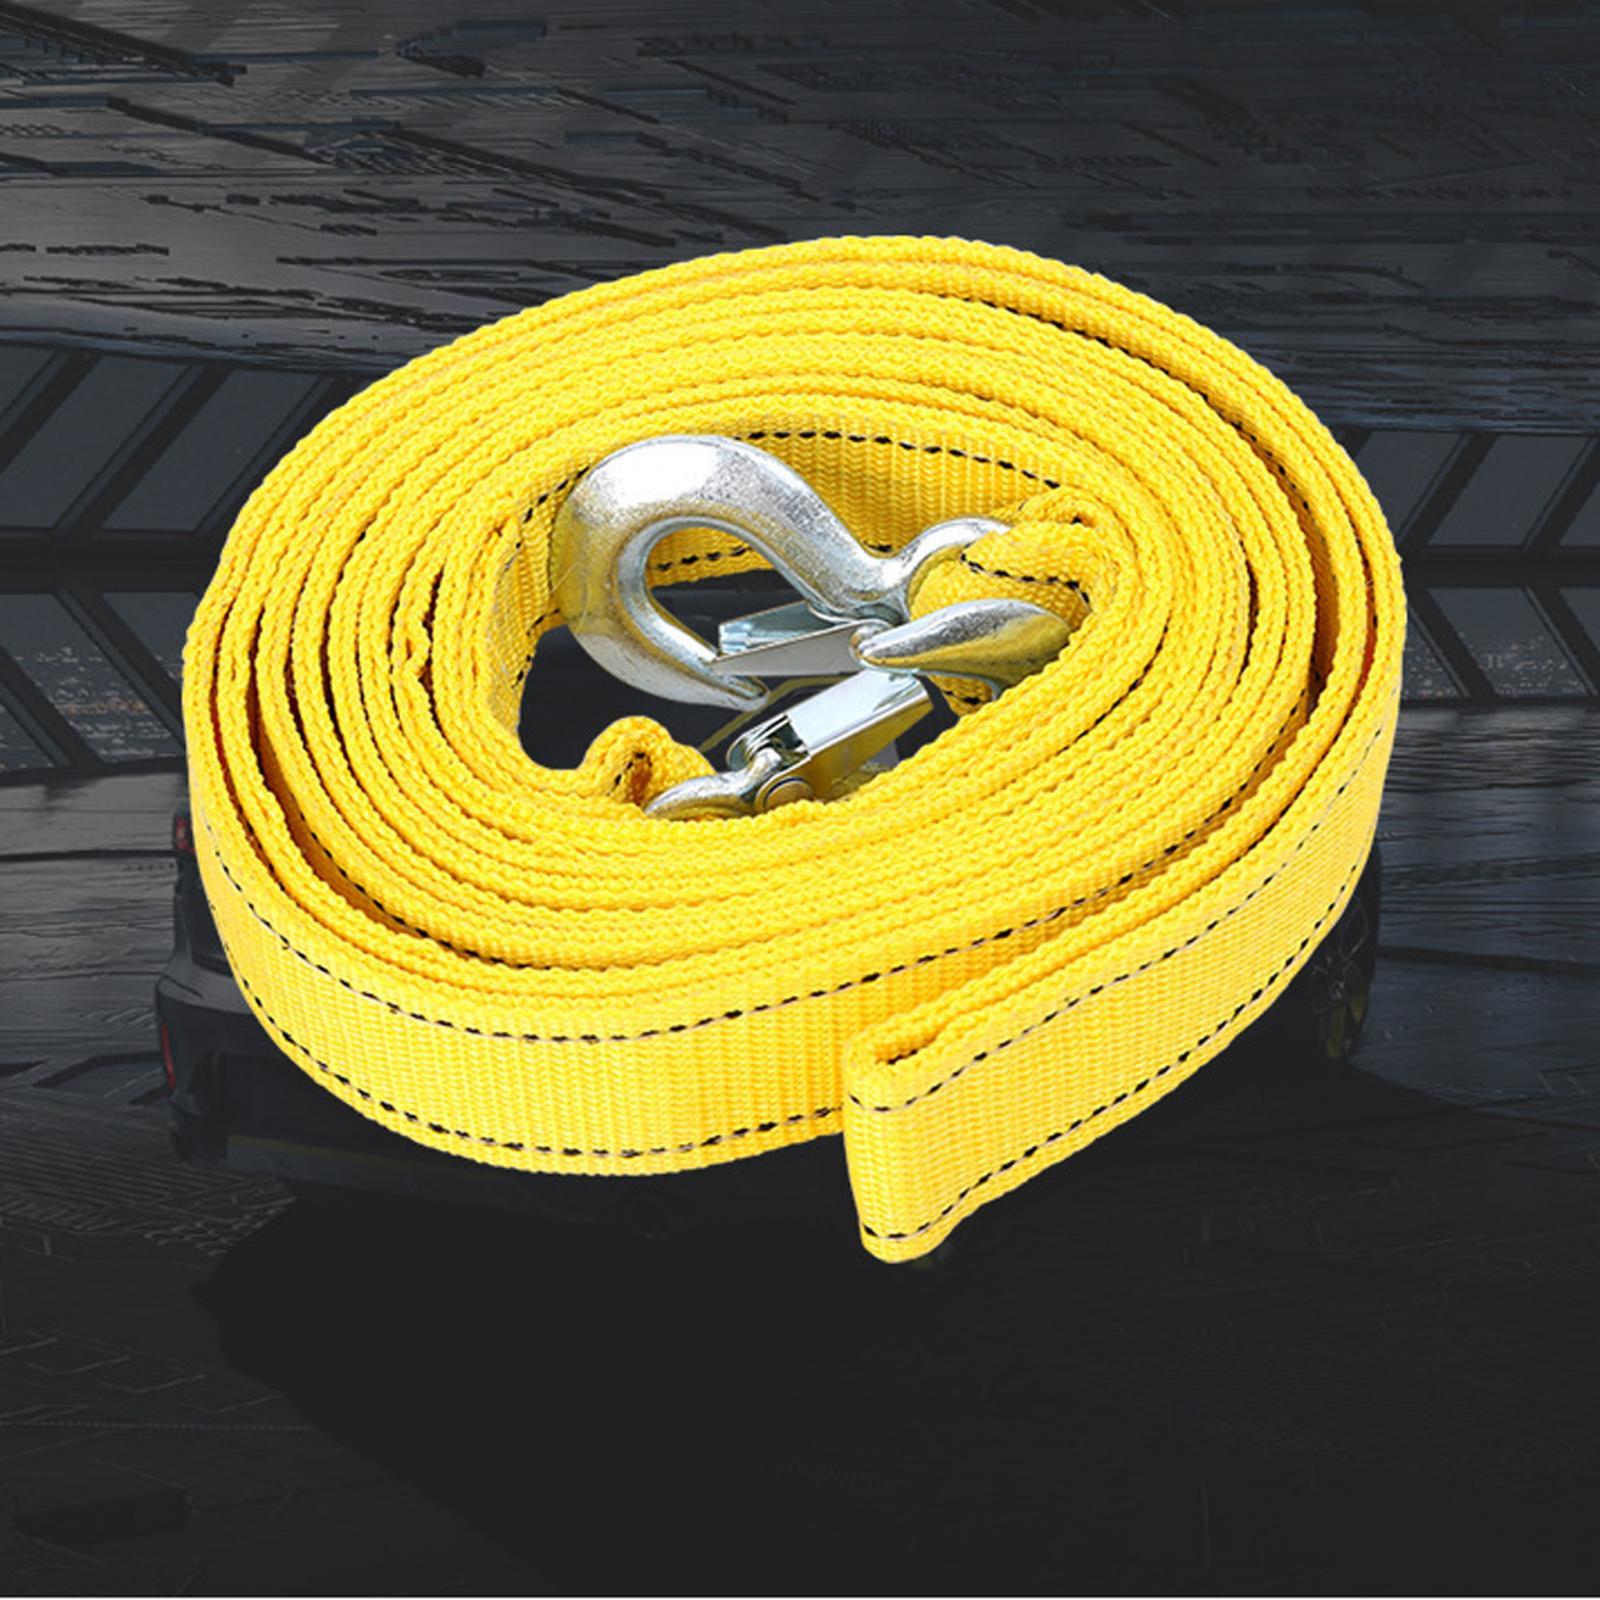 Tow Rope for Vehicles 5T Capacity Well Made Accessories Truck Recovery Strap 5m